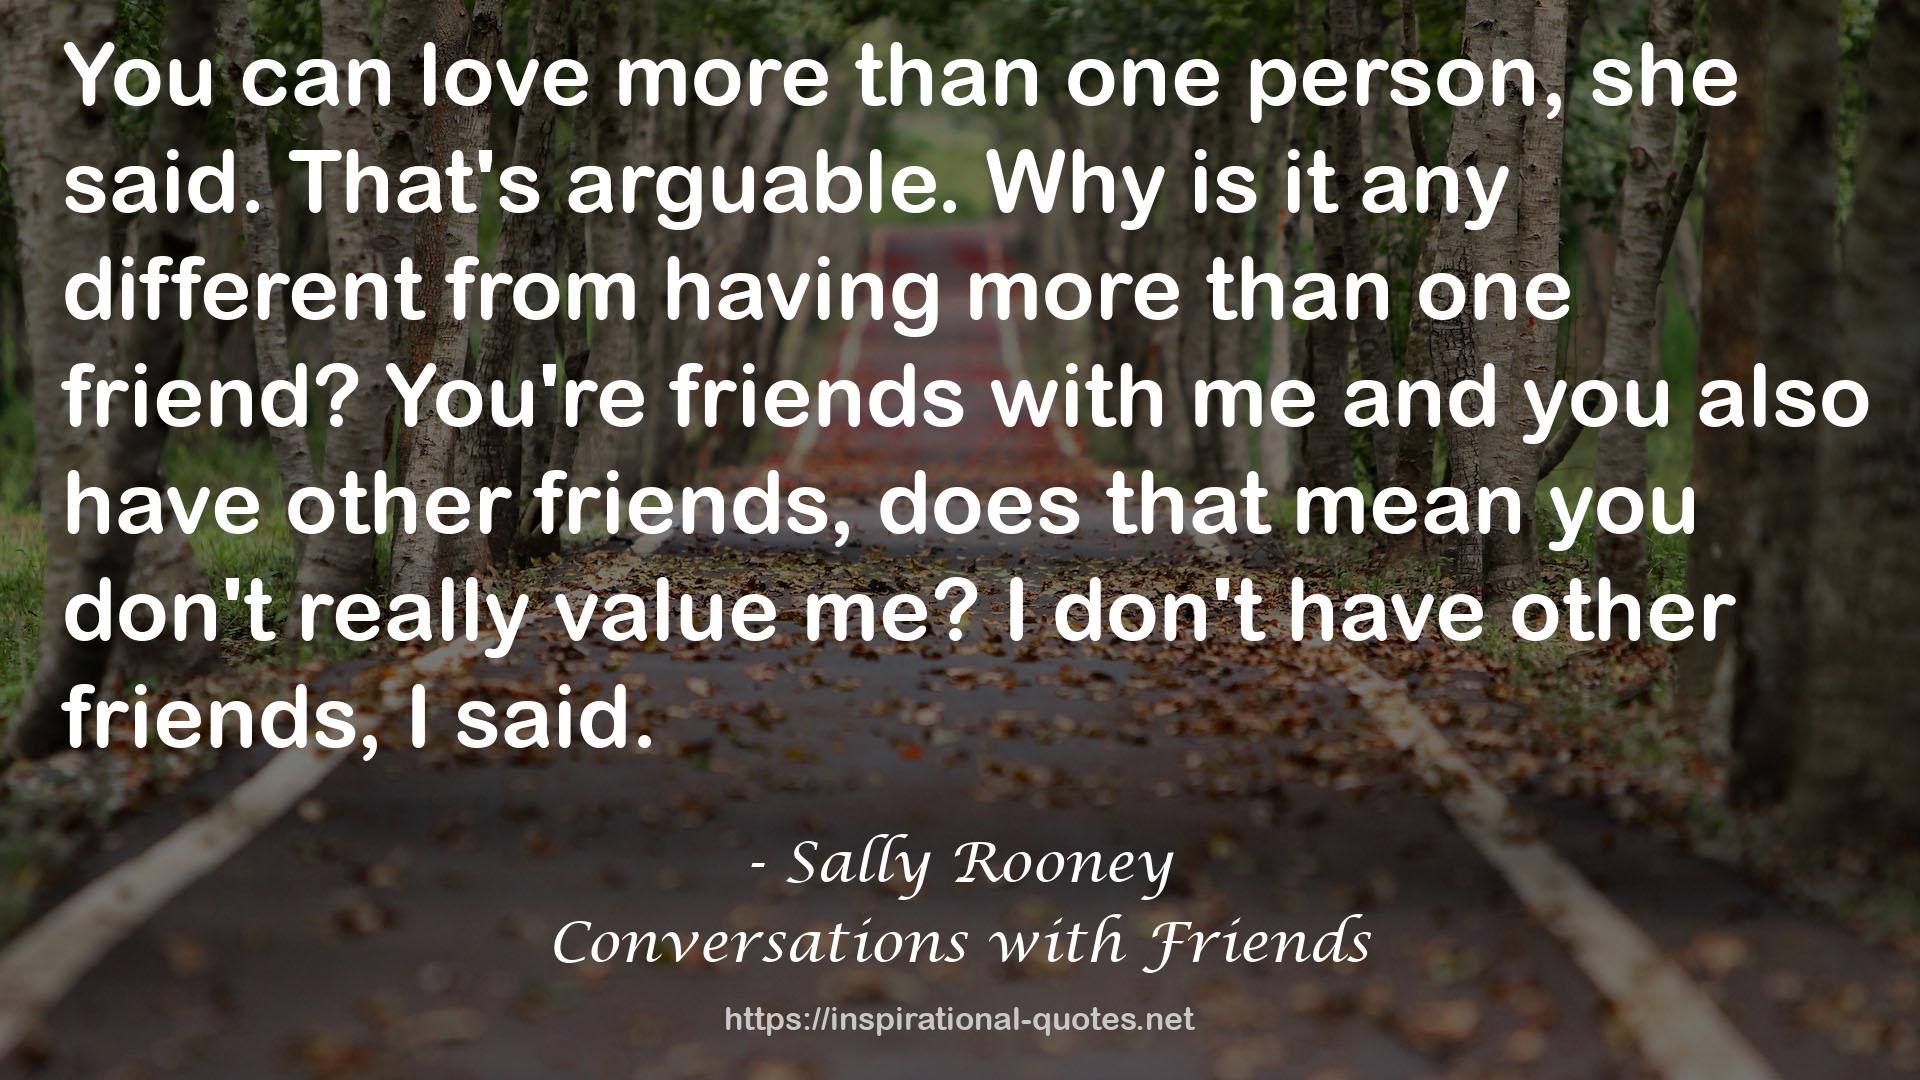 Sally Rooney QUOTES